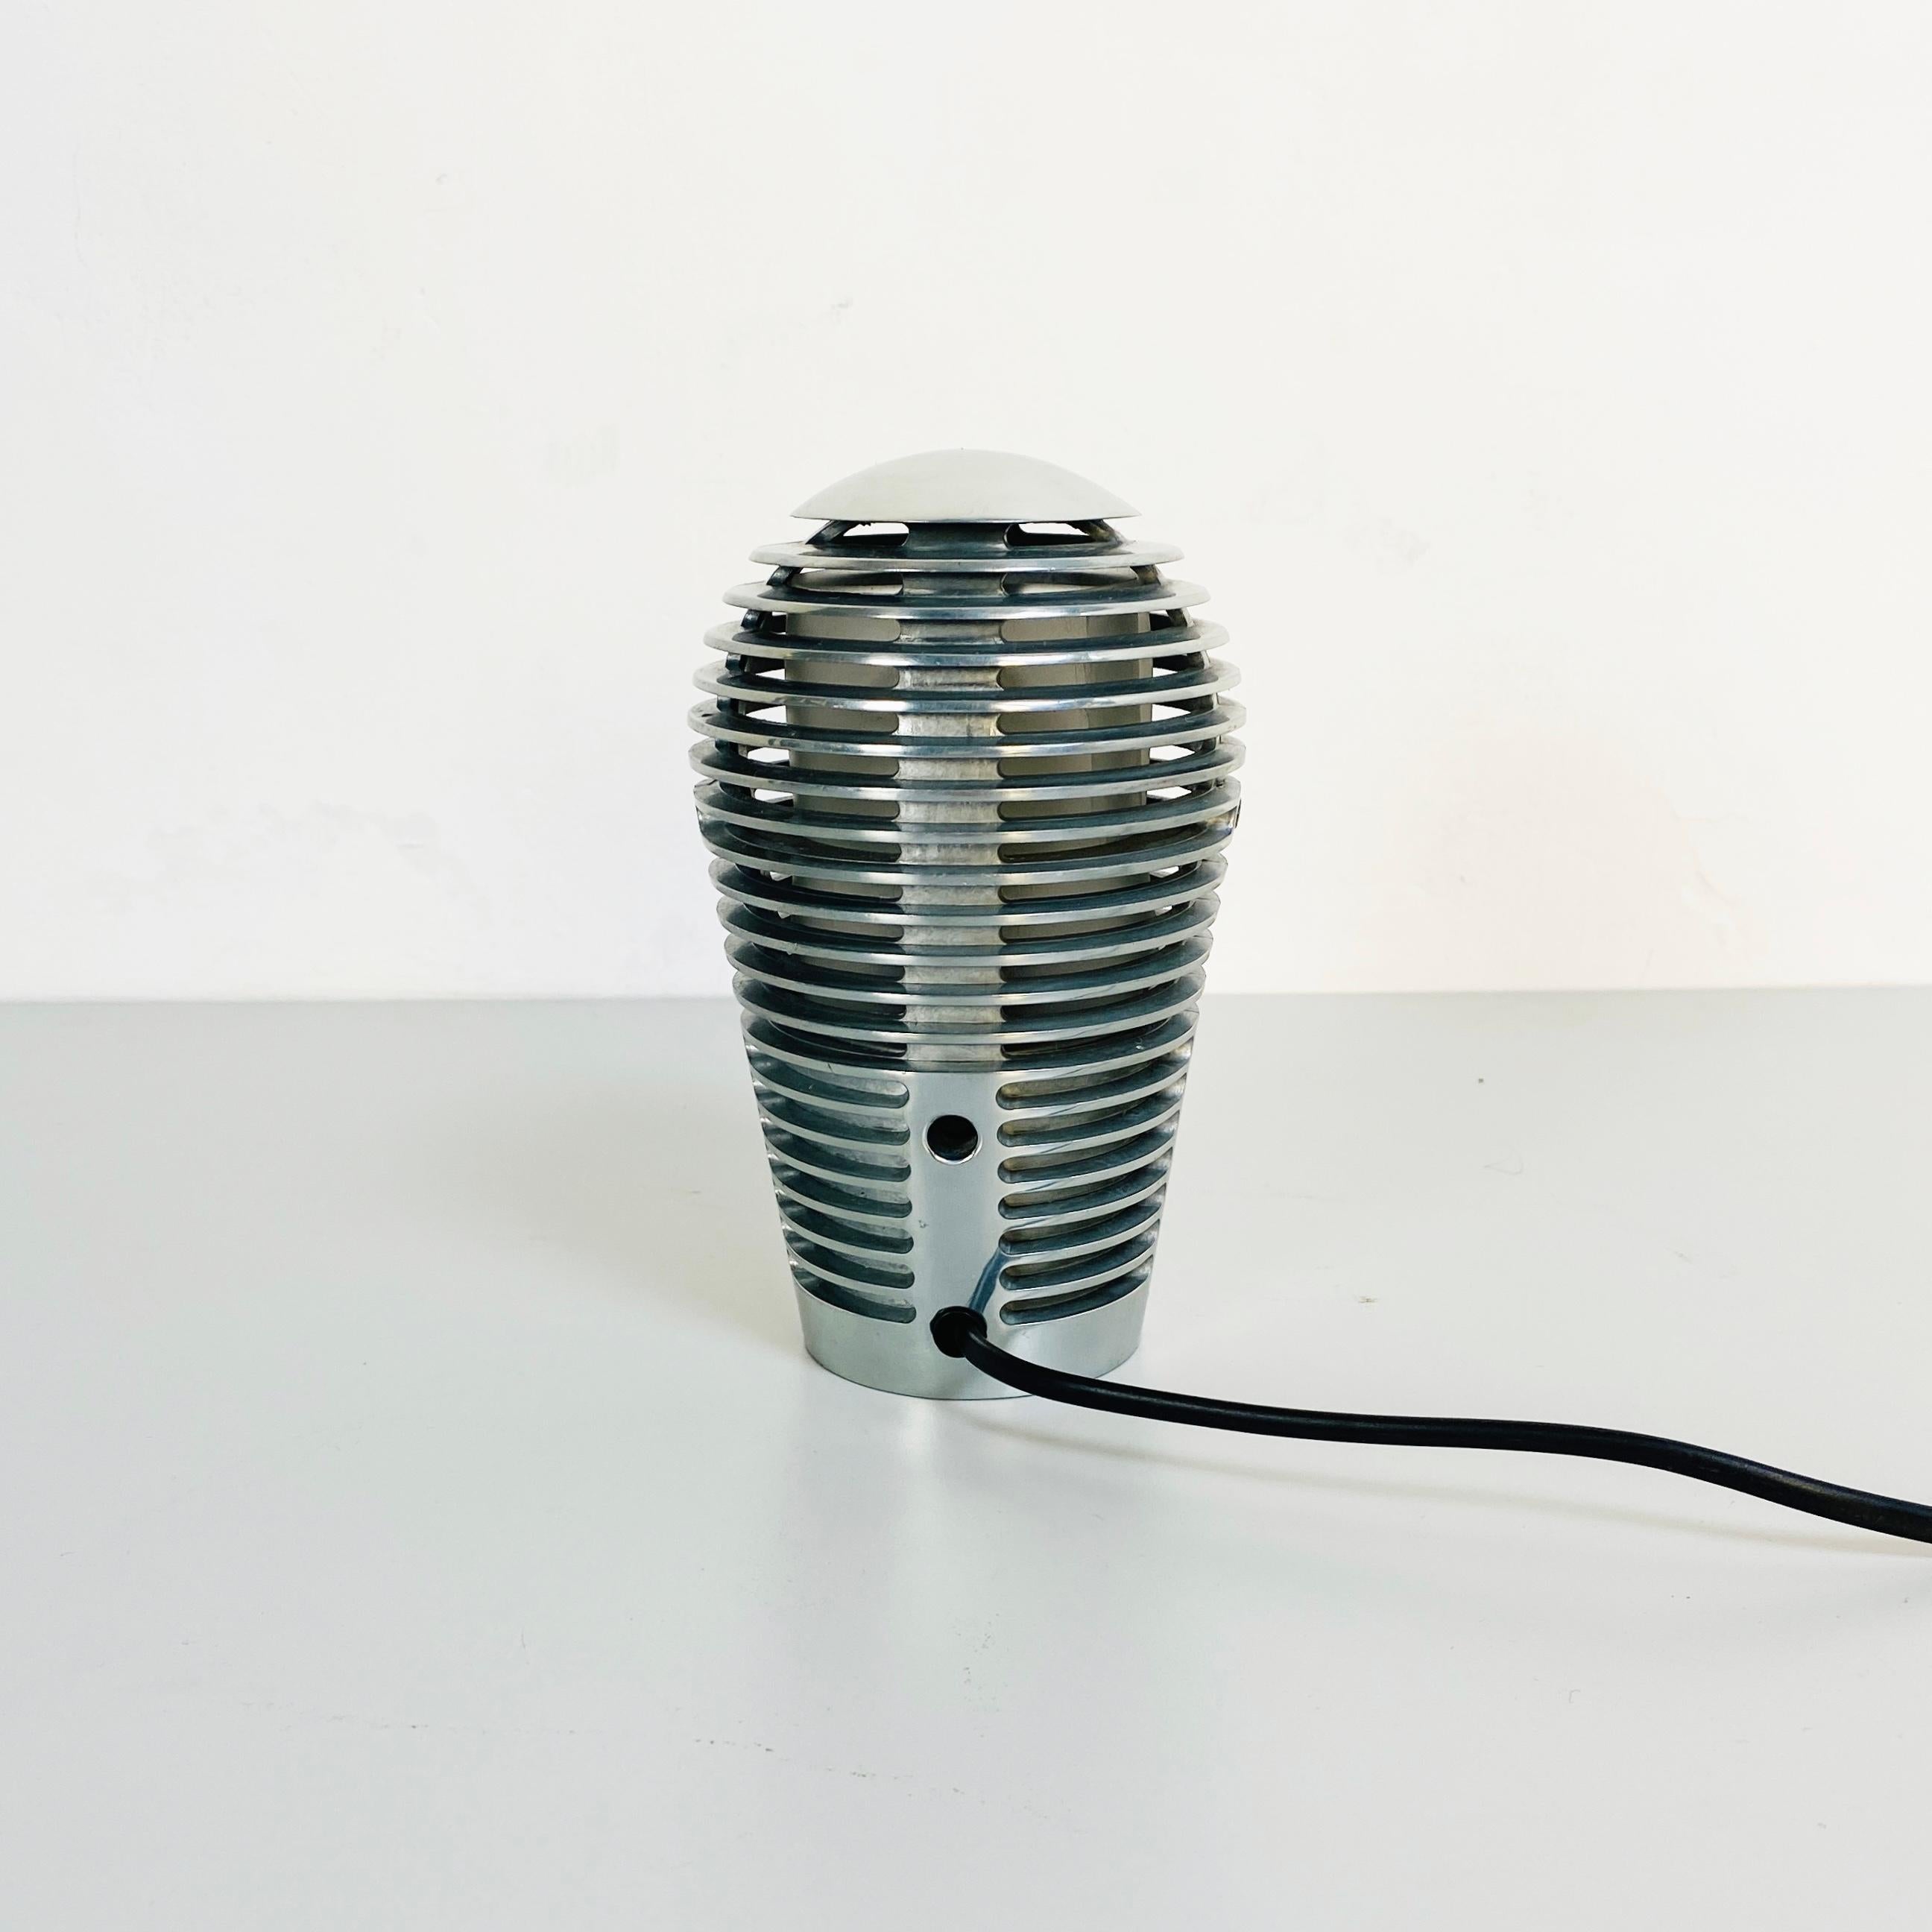 Late 20th Century Mid-Century Modern Metal Zen Table Lamp by S.Y.C. Cevese for Metalarte, 1984